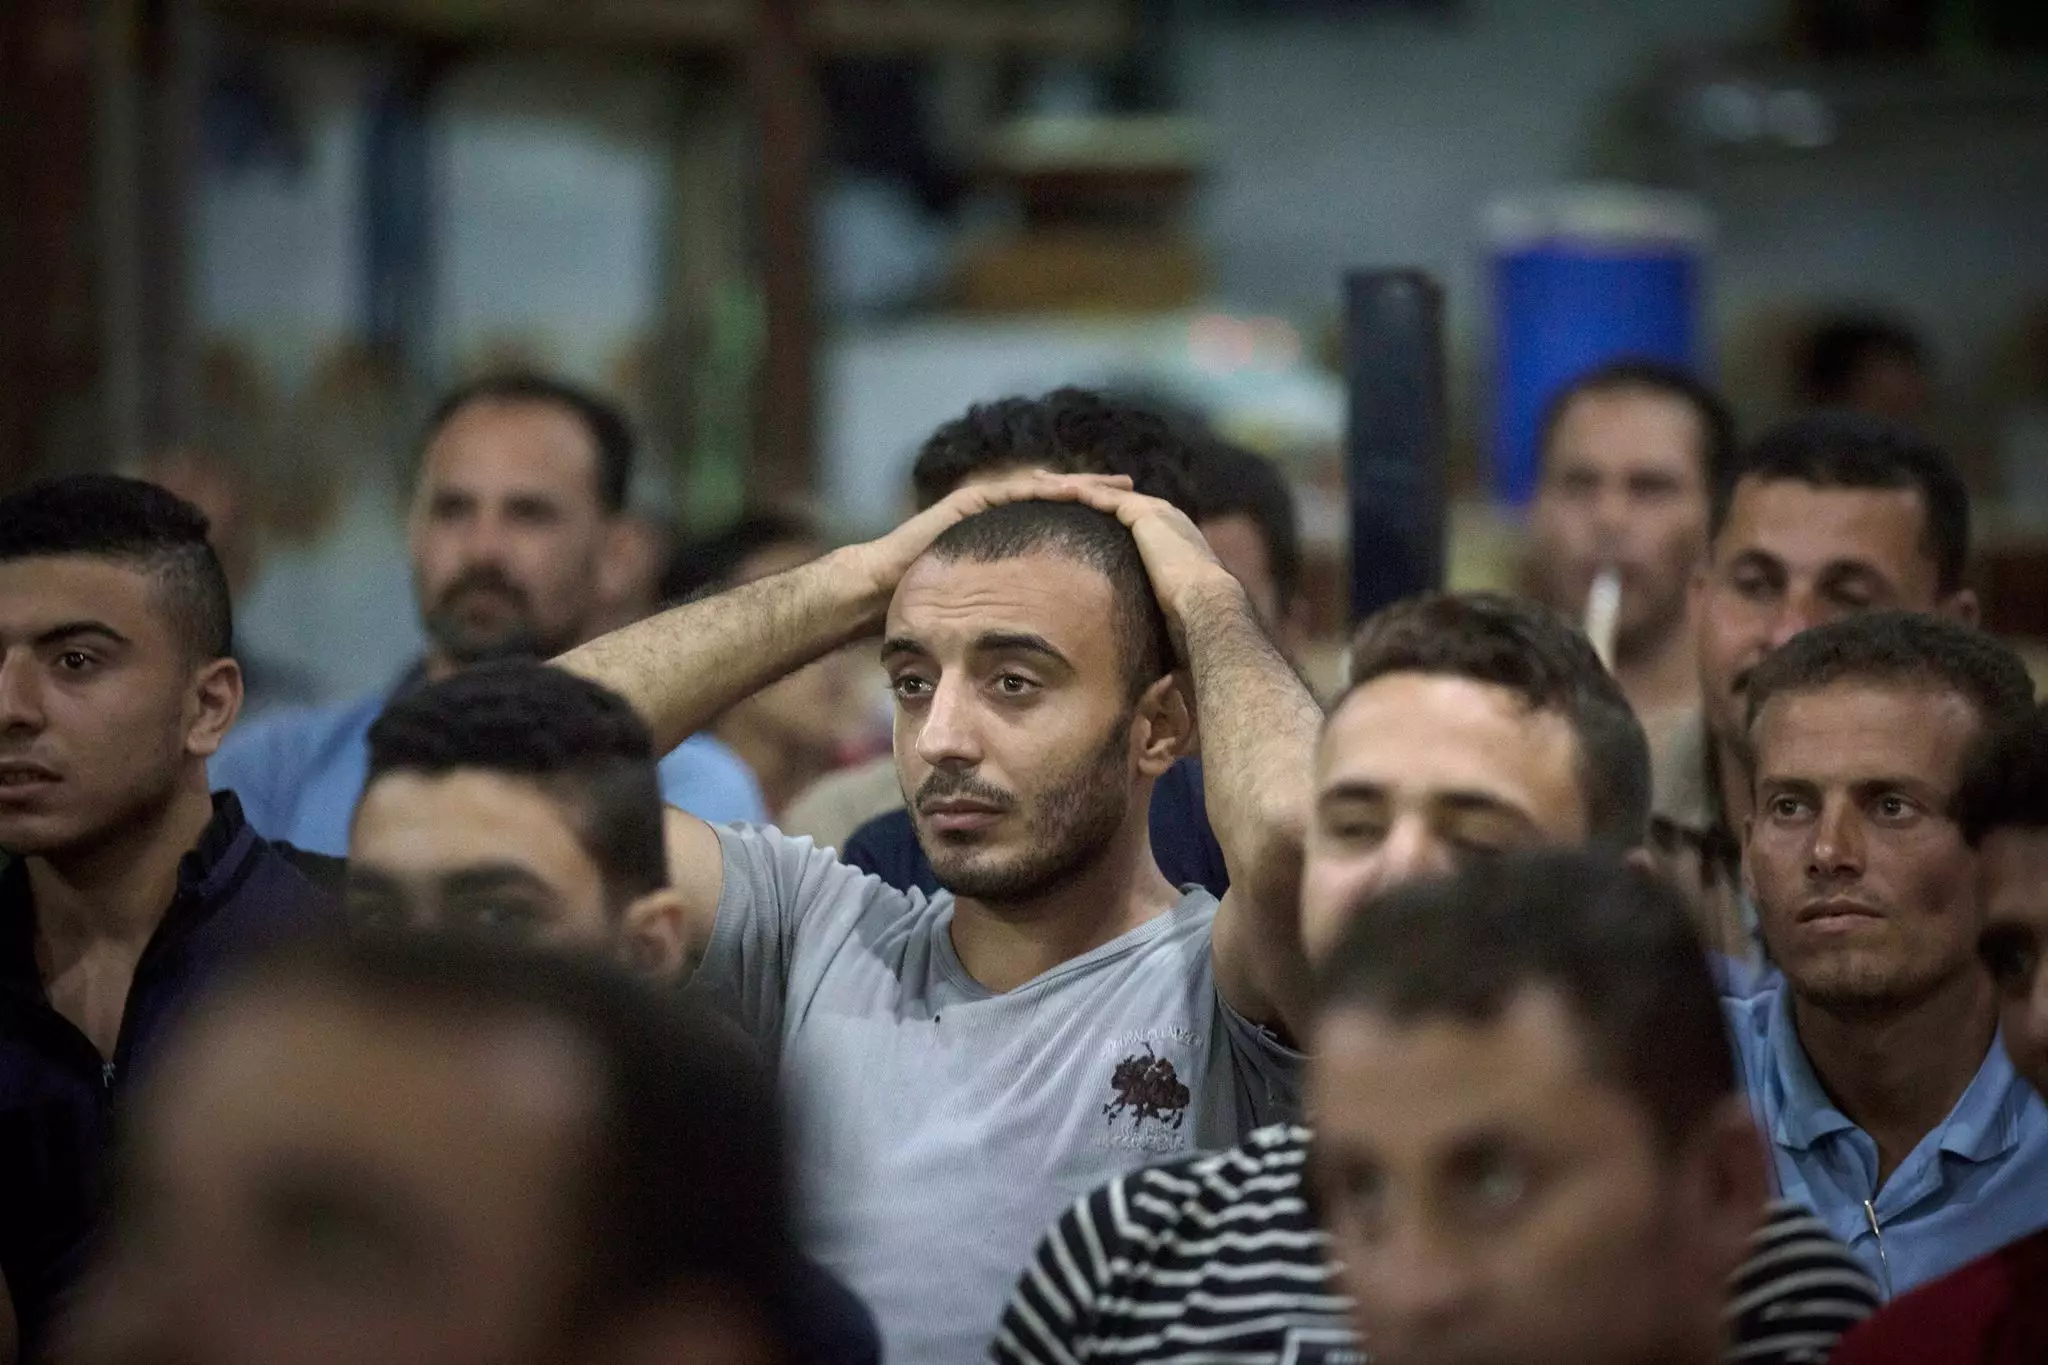 An Egyptian person reacts to Salah's injury. Image: PA